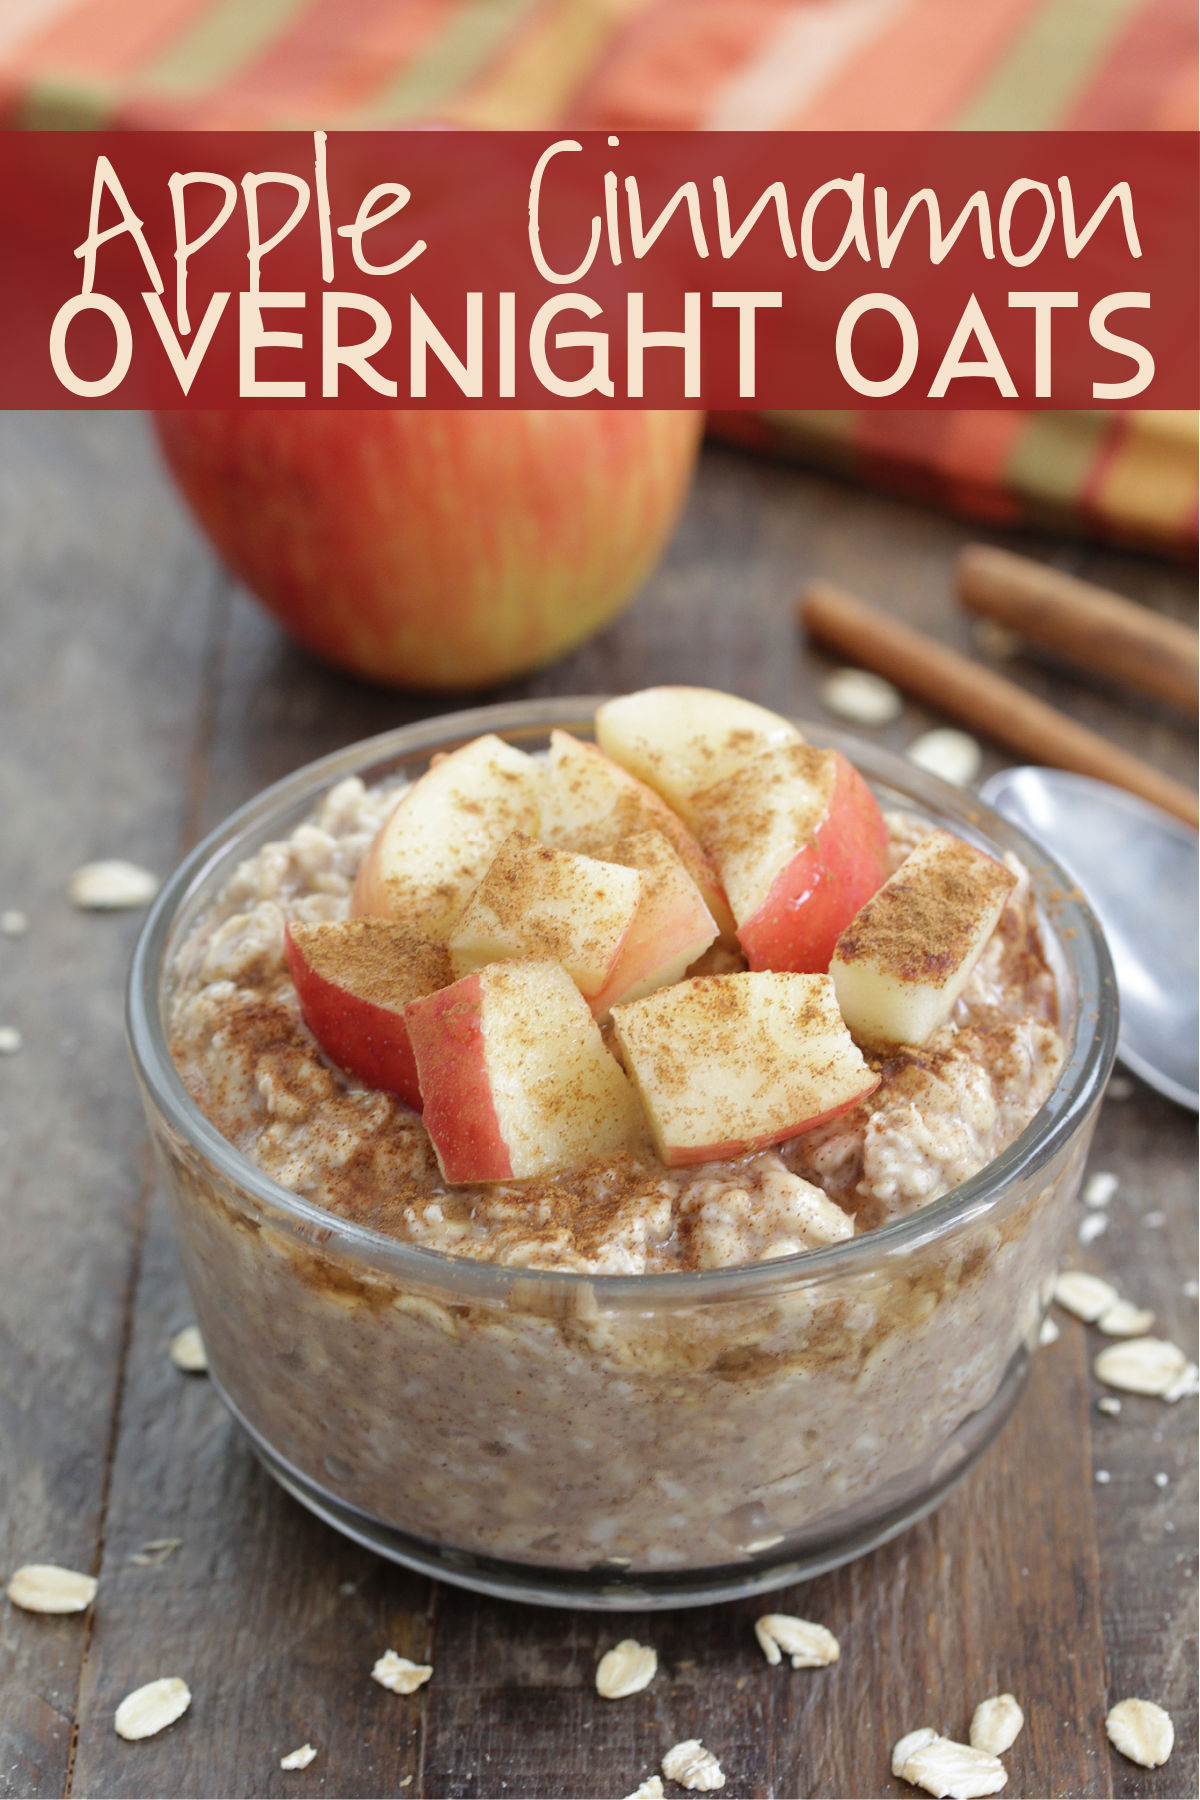 Apple Cinnamon Overnight Oats in a glass jar with diced apples and cinnamon on top